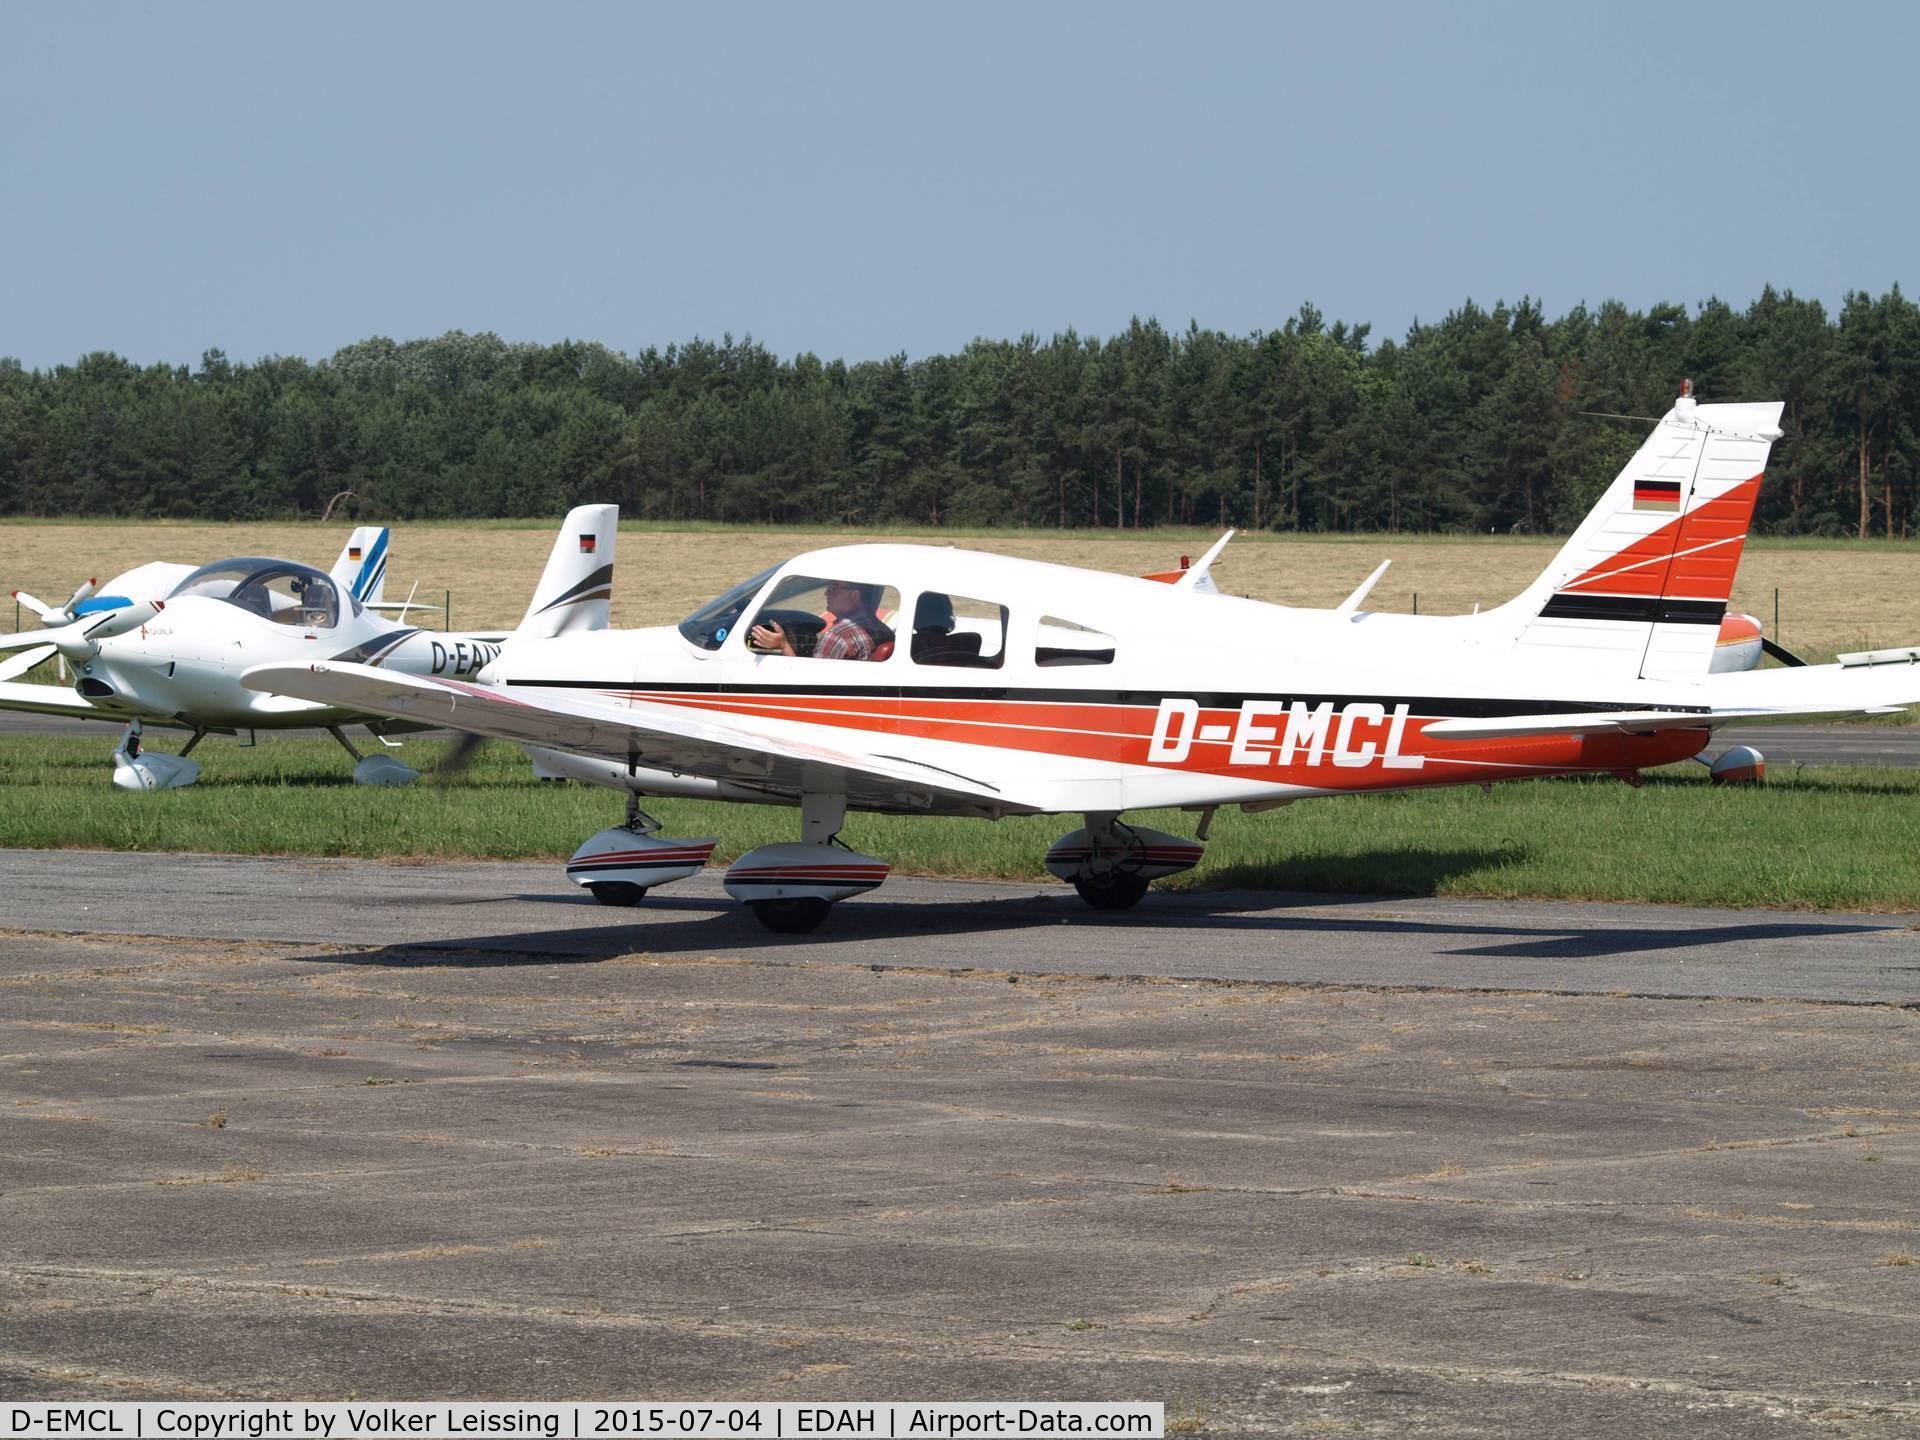 D-EMCL, 1975 Piper PA-28-151 C/N 28-7415086, taxing